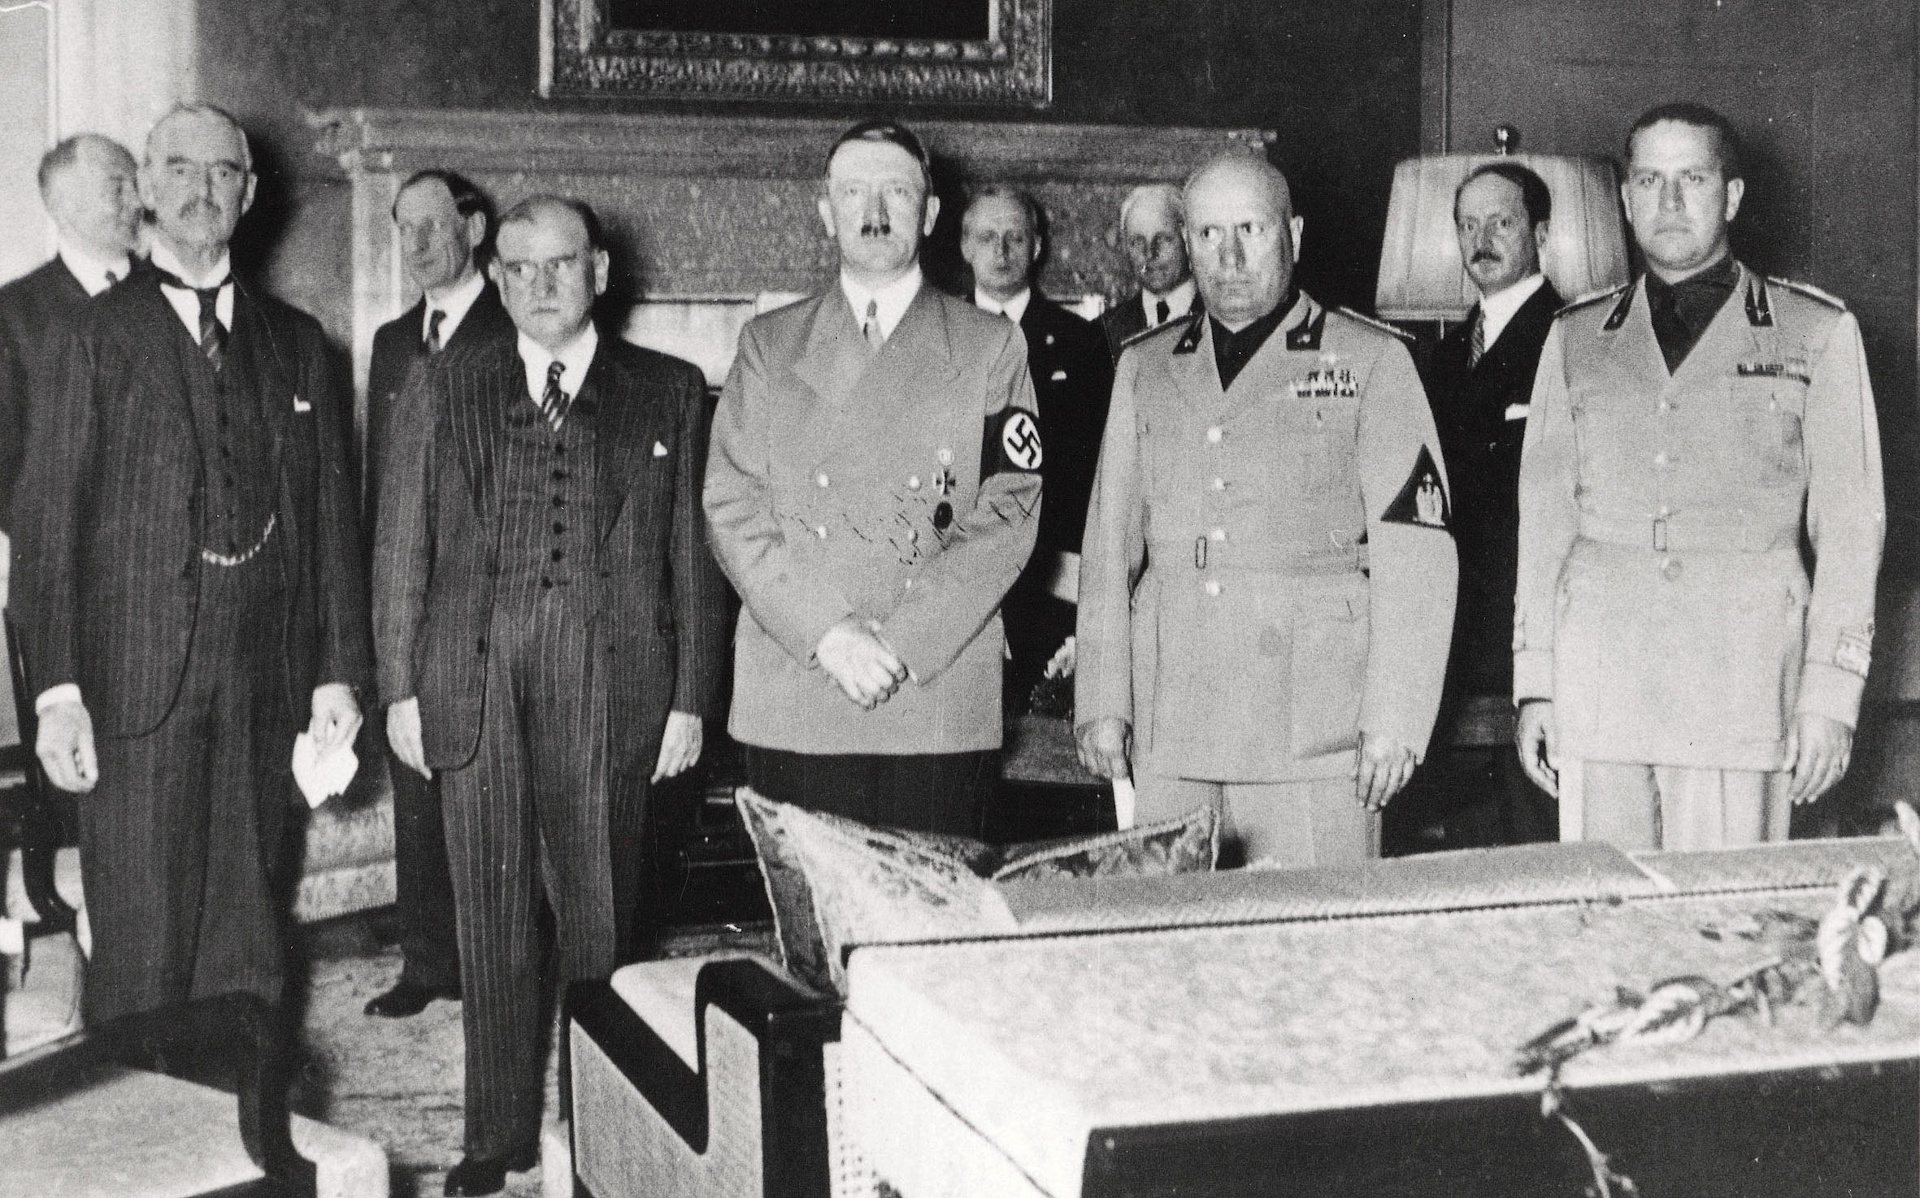 Several men in a room standing next to and behind each other and looking at the camera.